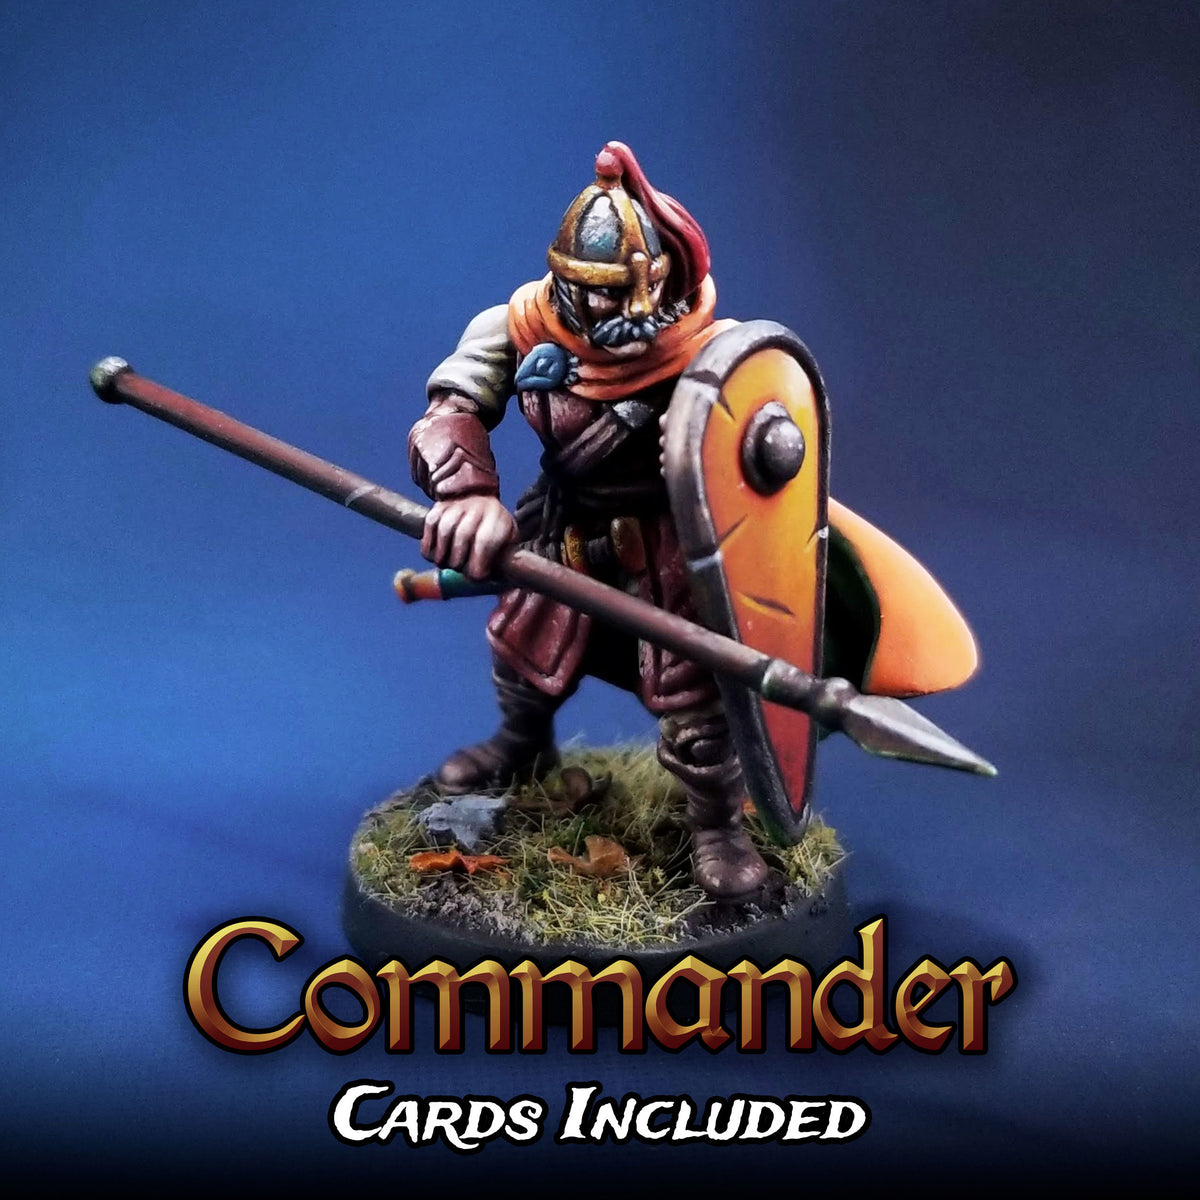 Lone Guard Commander with Character Card and Upgrade Card. Miniature Metal King Studio Exit 23 Games Lone Guard Commander with Character Card and Upgrade Card.